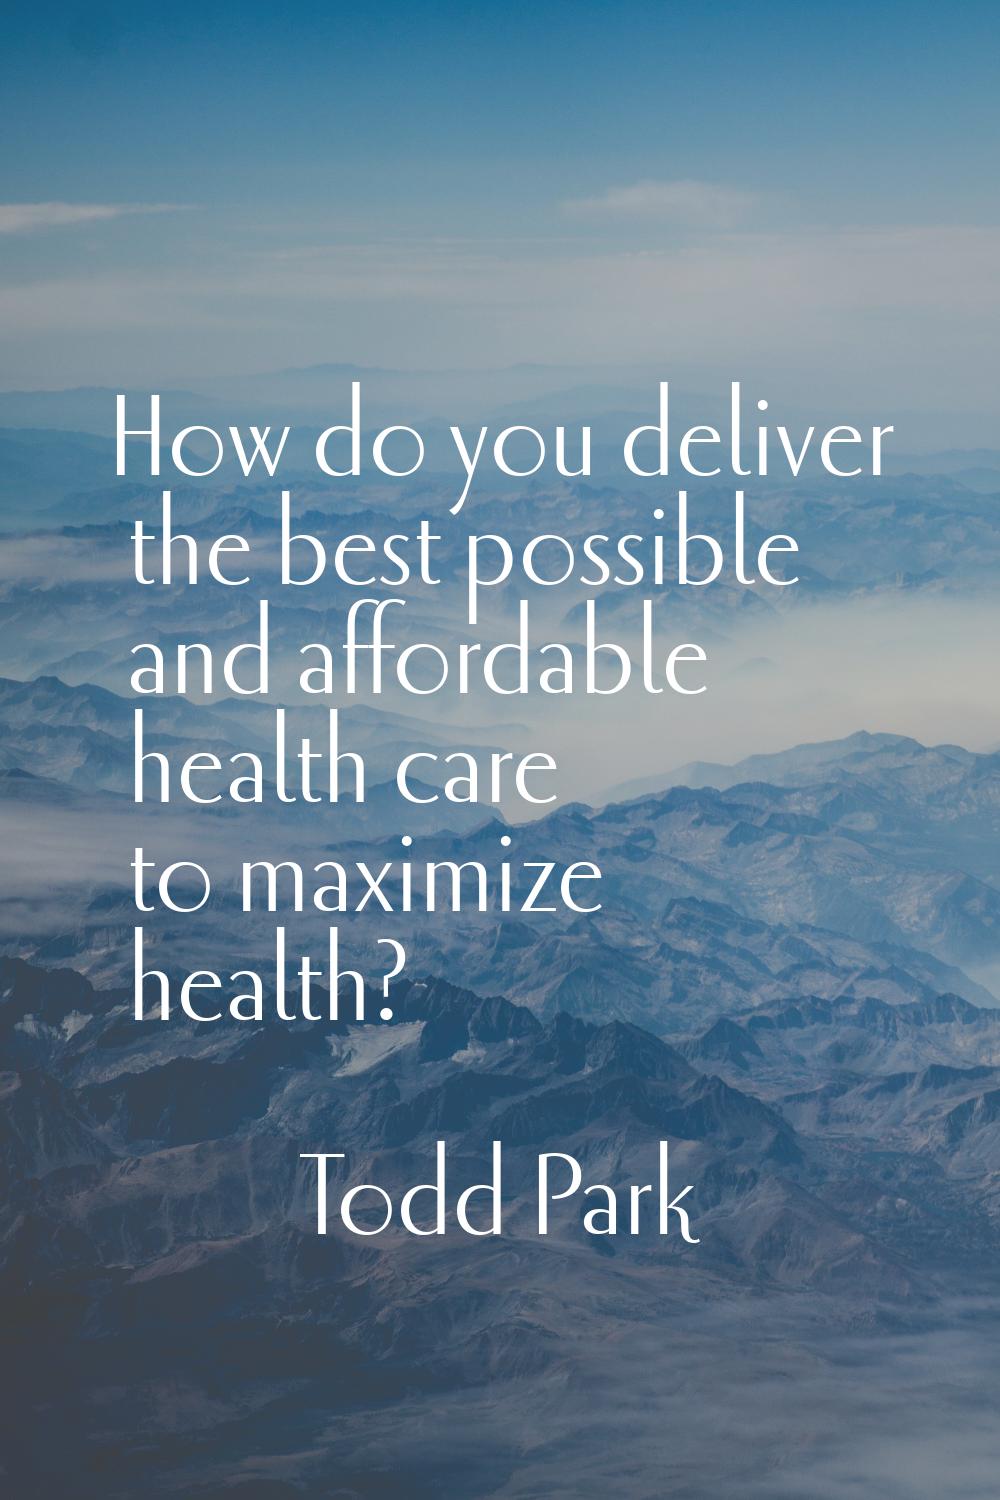 How do you deliver the best possible and affordable health care to maximize health?